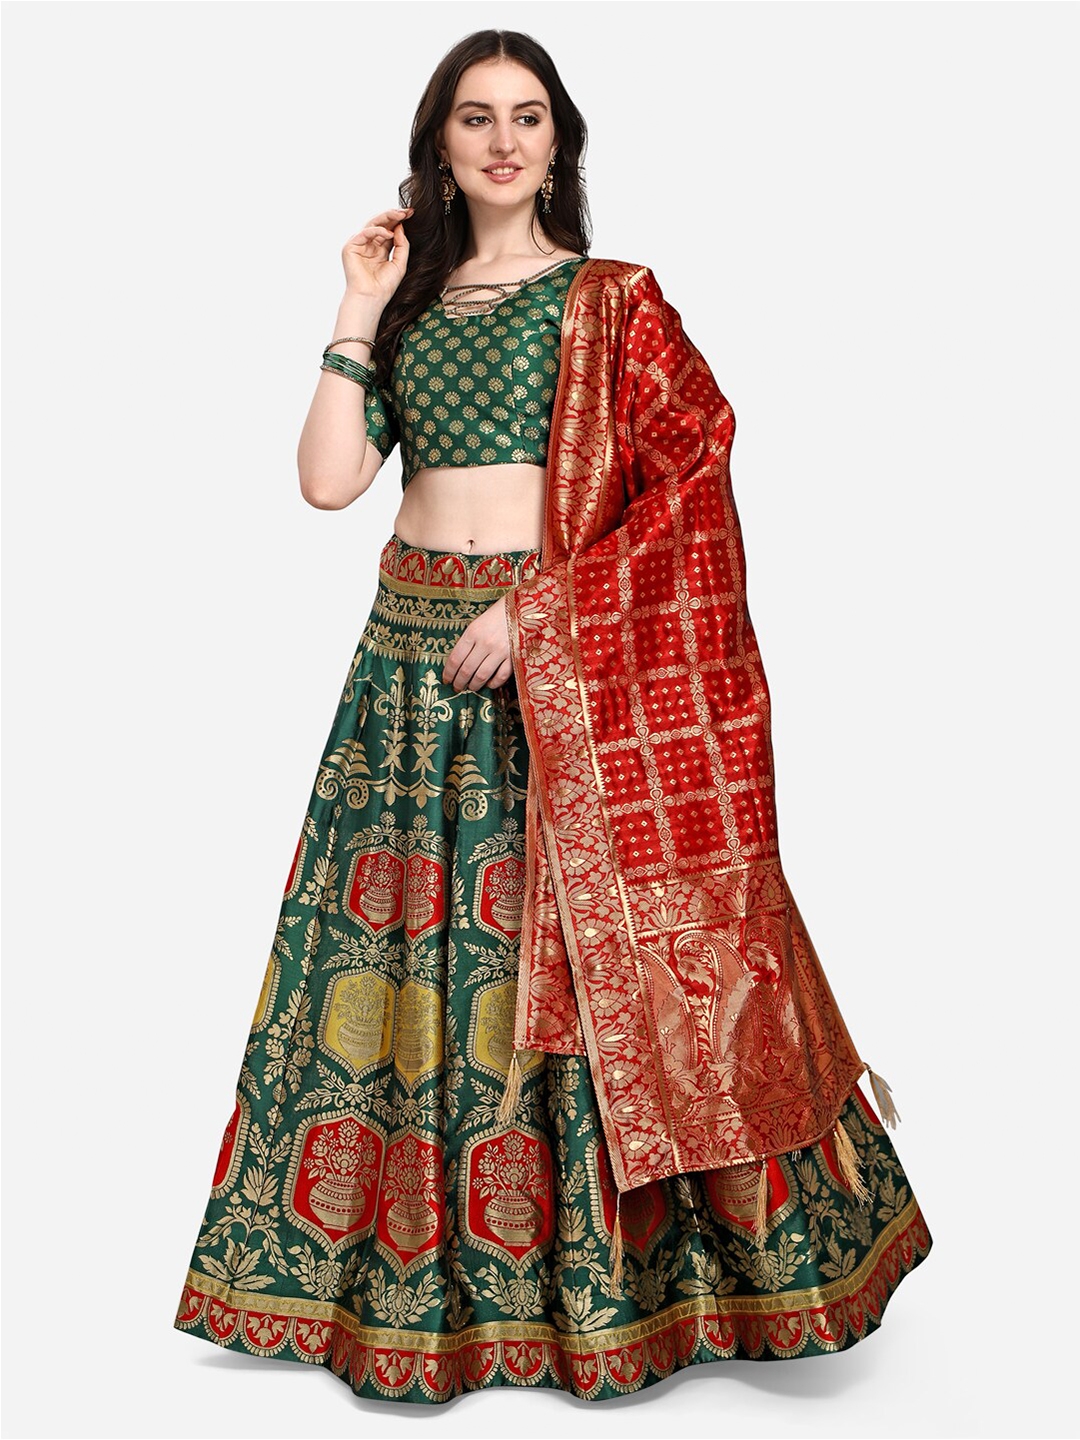 Red bridal lehenga with pink dupatta for a traditional look! | Lehenga  color combinations, Latest bridal lehenga, Bridal lehenga red